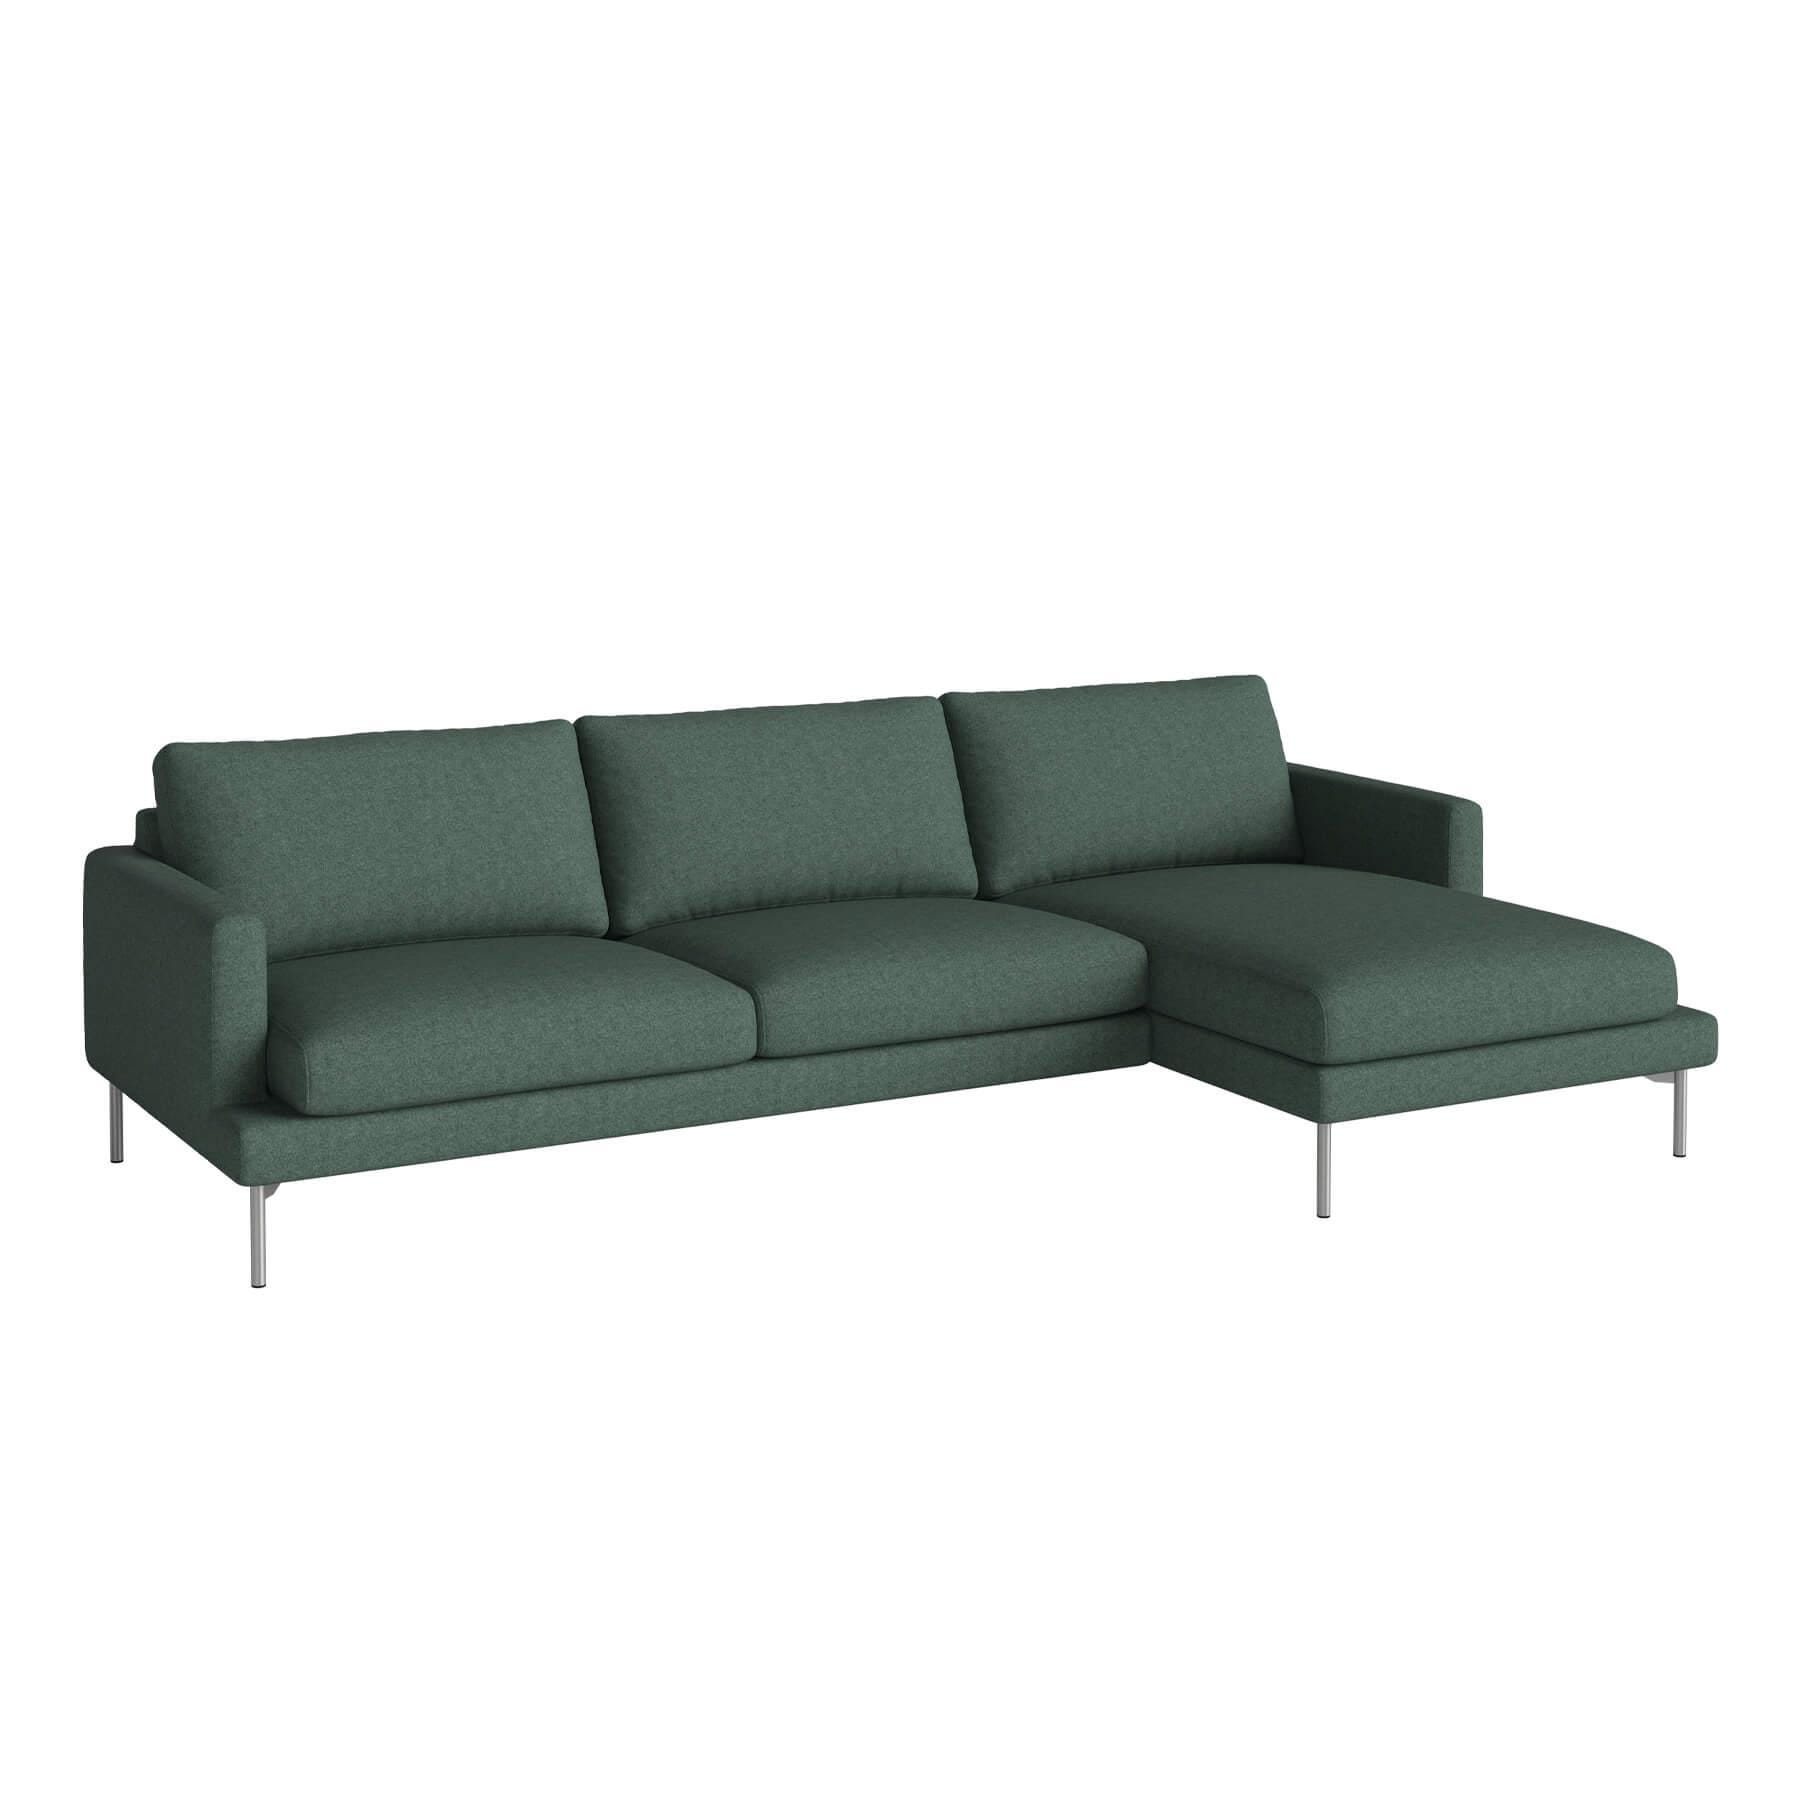 Bolia Veneda Sofa 35 Seater Sofa With Chaise Longue Brushed Steel London Sea Green Right Green Designer Furniture From Holloways Of Ludlow